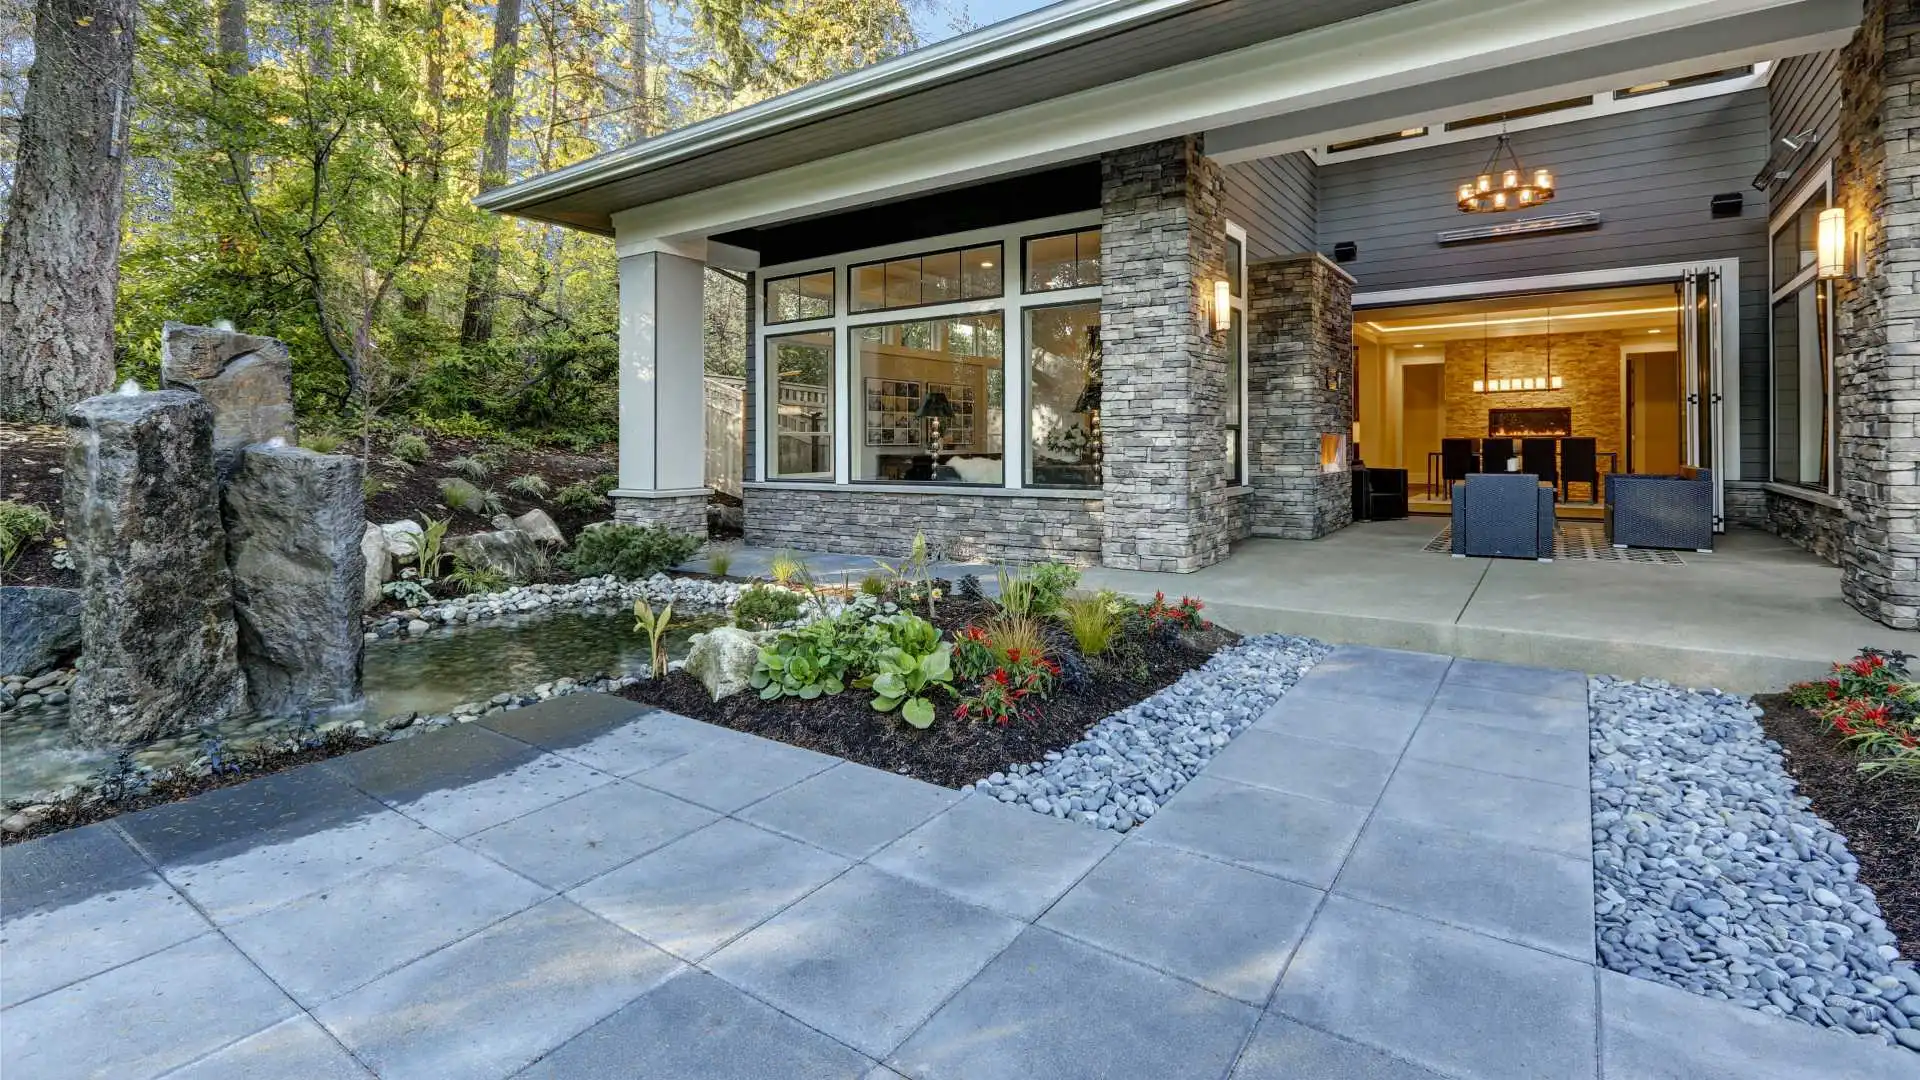 3 Things to Consider When Choosing the Materials for Your New Patio